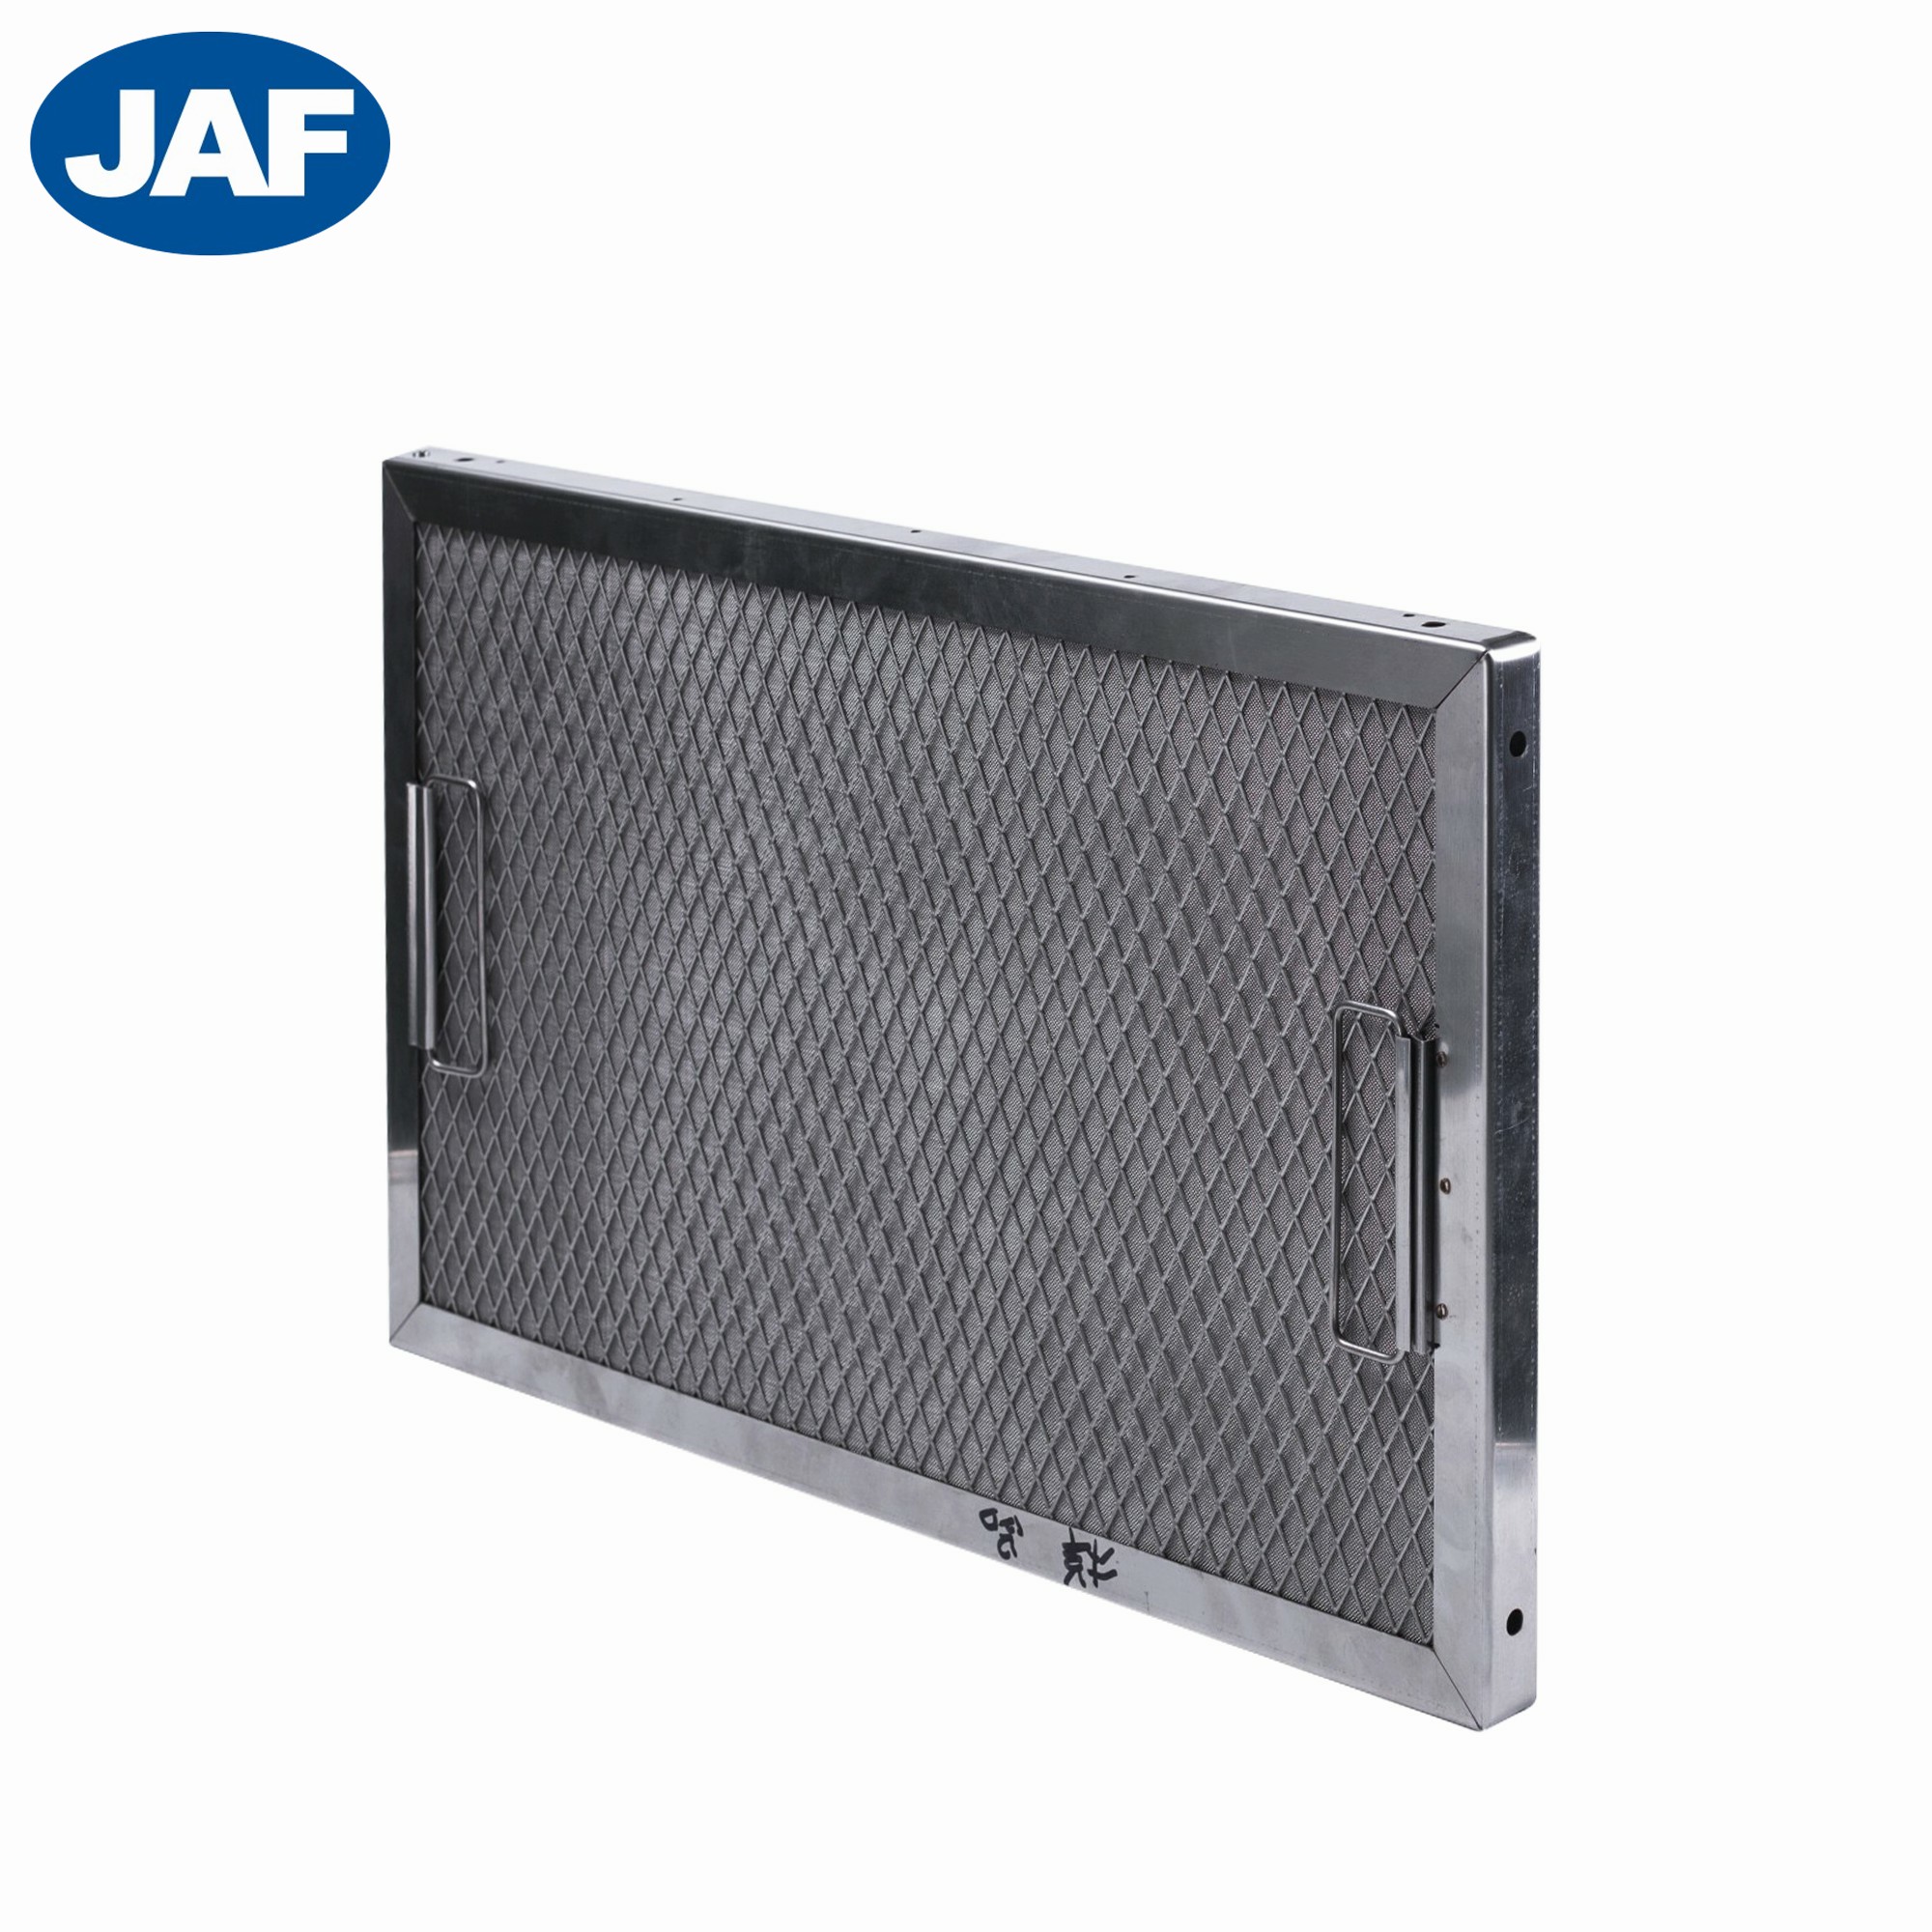 Air filter washable all metals panel filter for ahu hvac